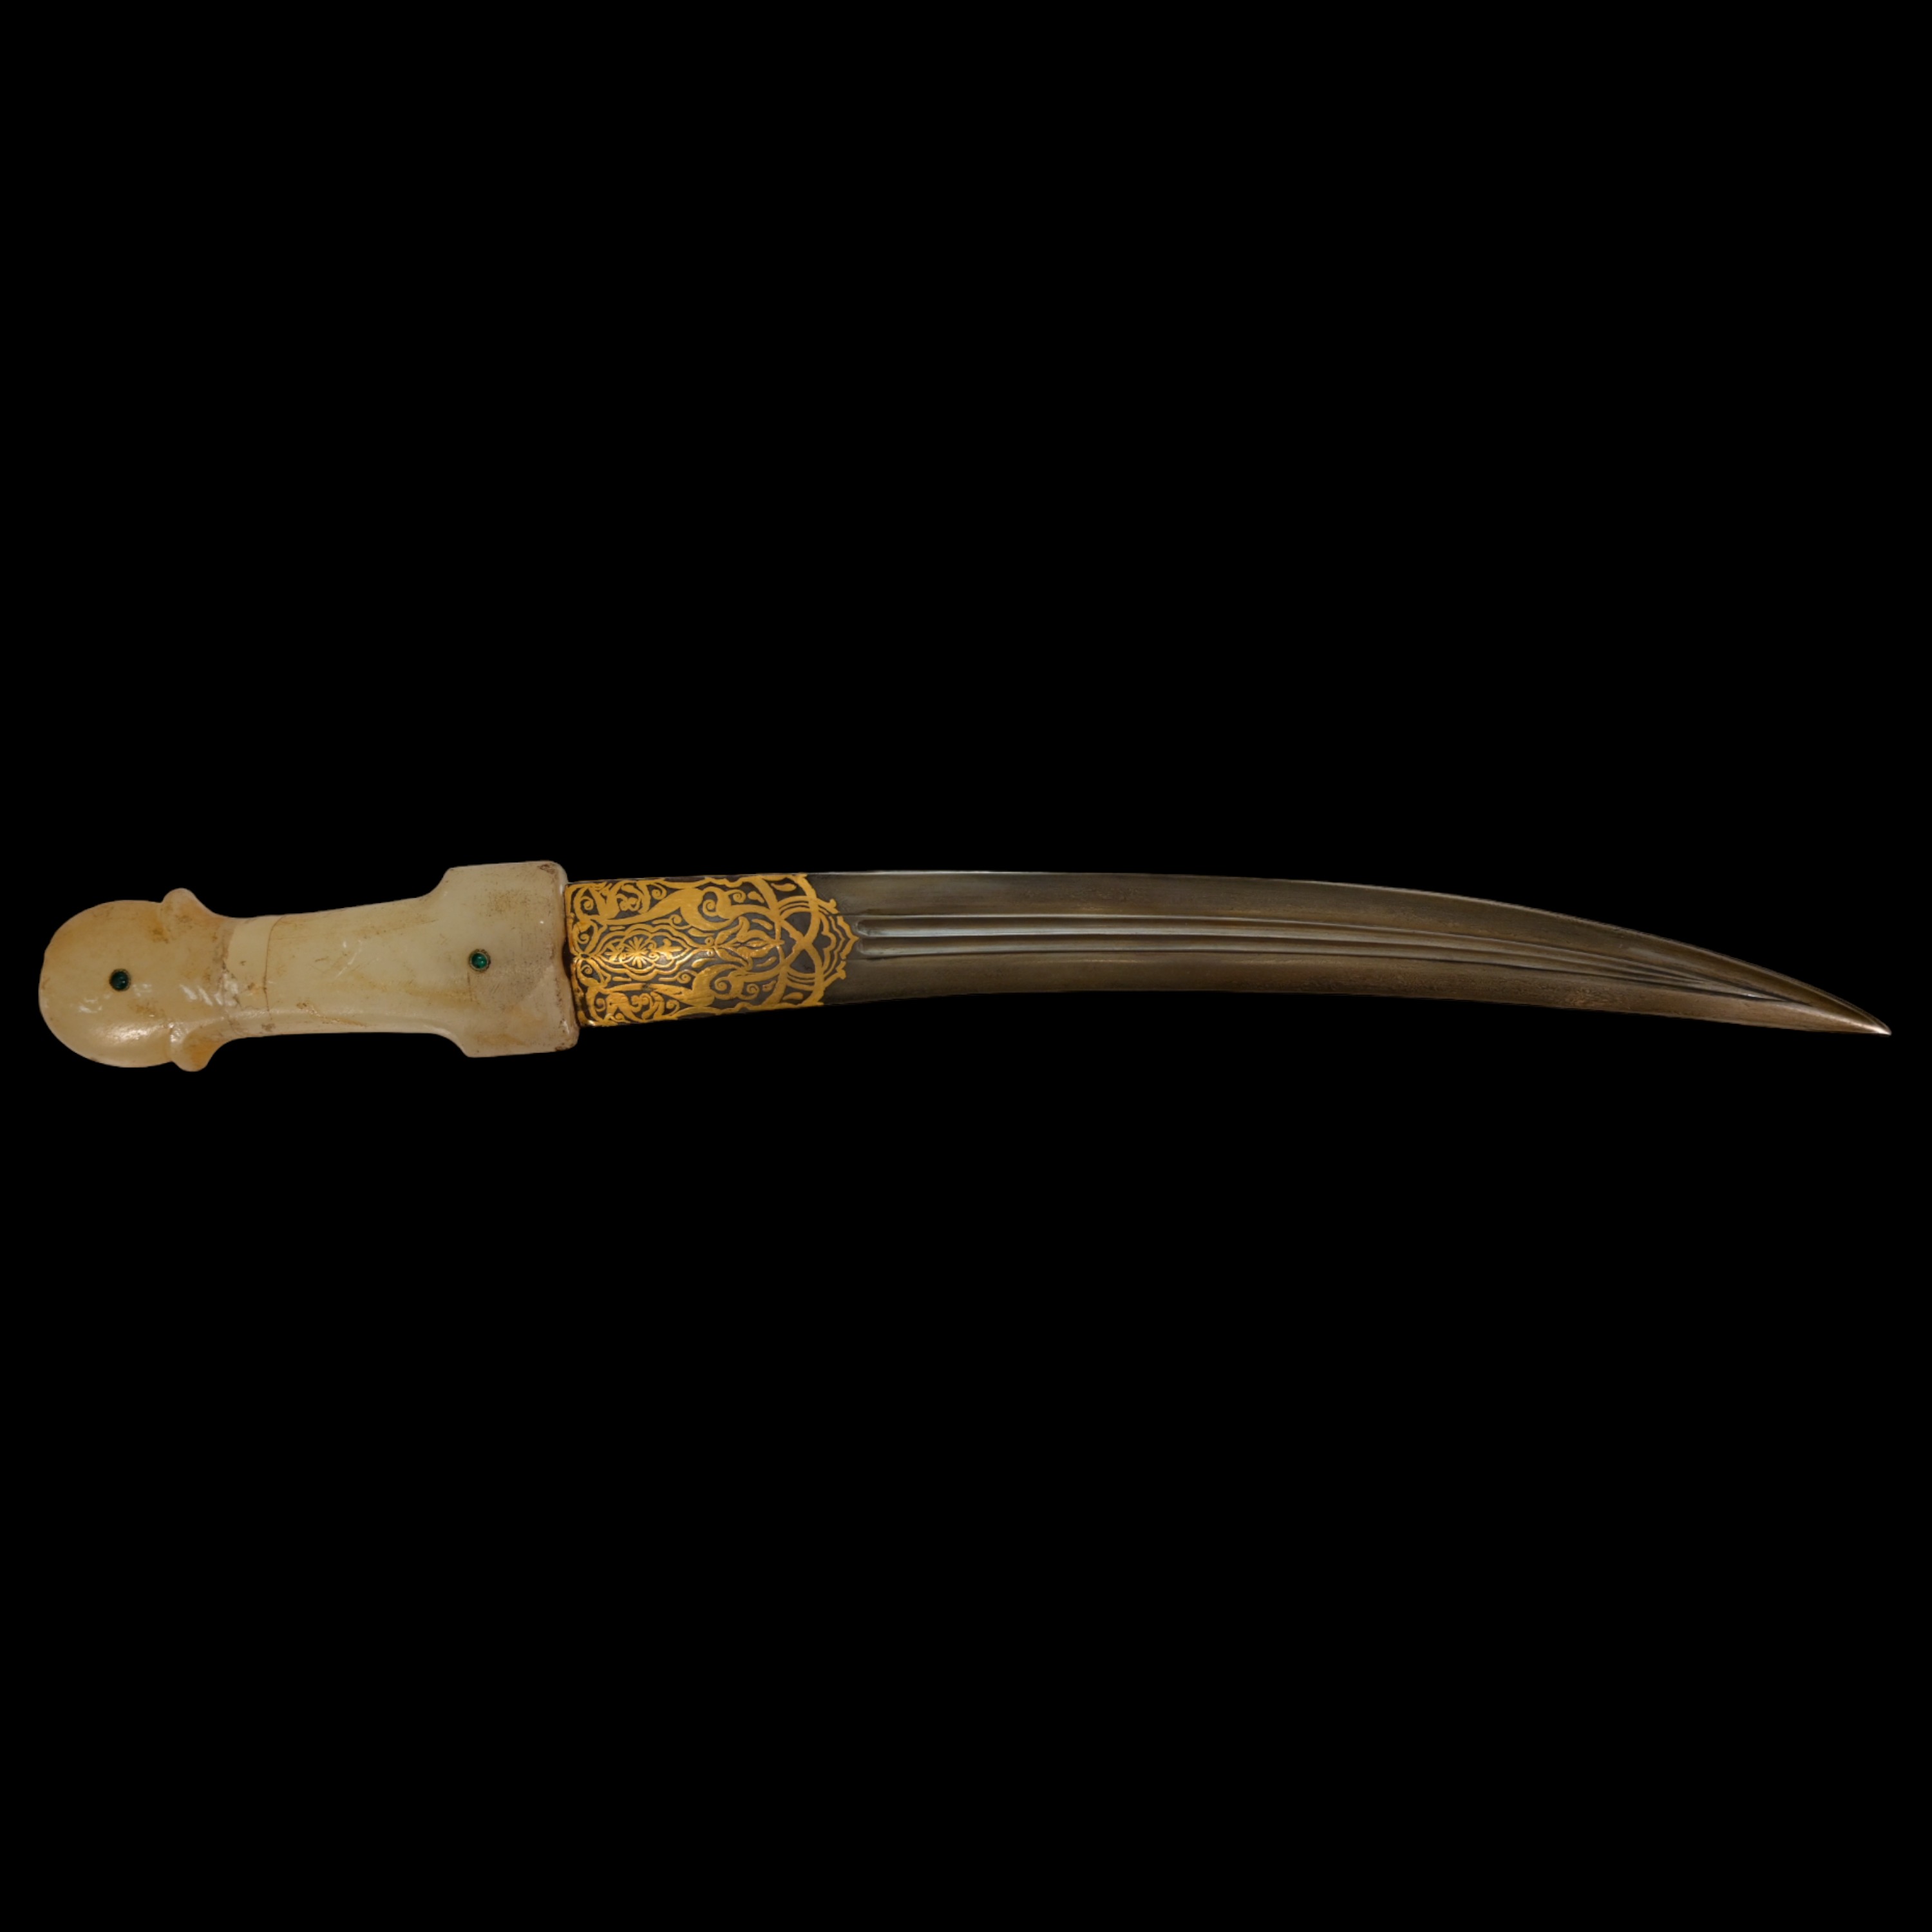 Very rare Dagger with jade handle, Wootz blade, precious stones and gold, Ottoman Empire, 18th C. - Image 13 of 19